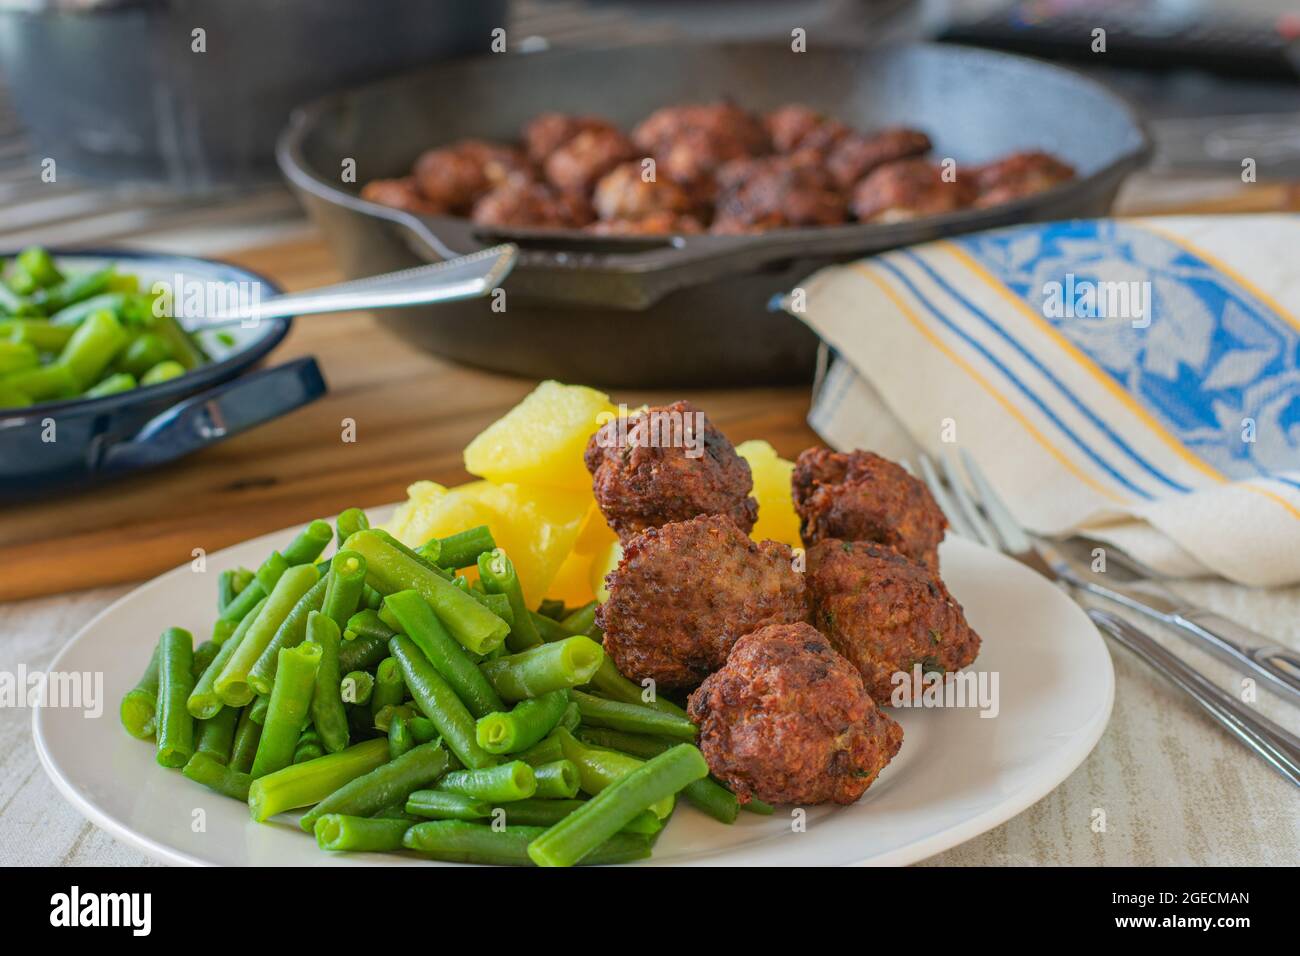 Fried meatballs with green beans and boiled potatoes on a plate on rustic kitchen table background. Homemade cooking Stock Photo